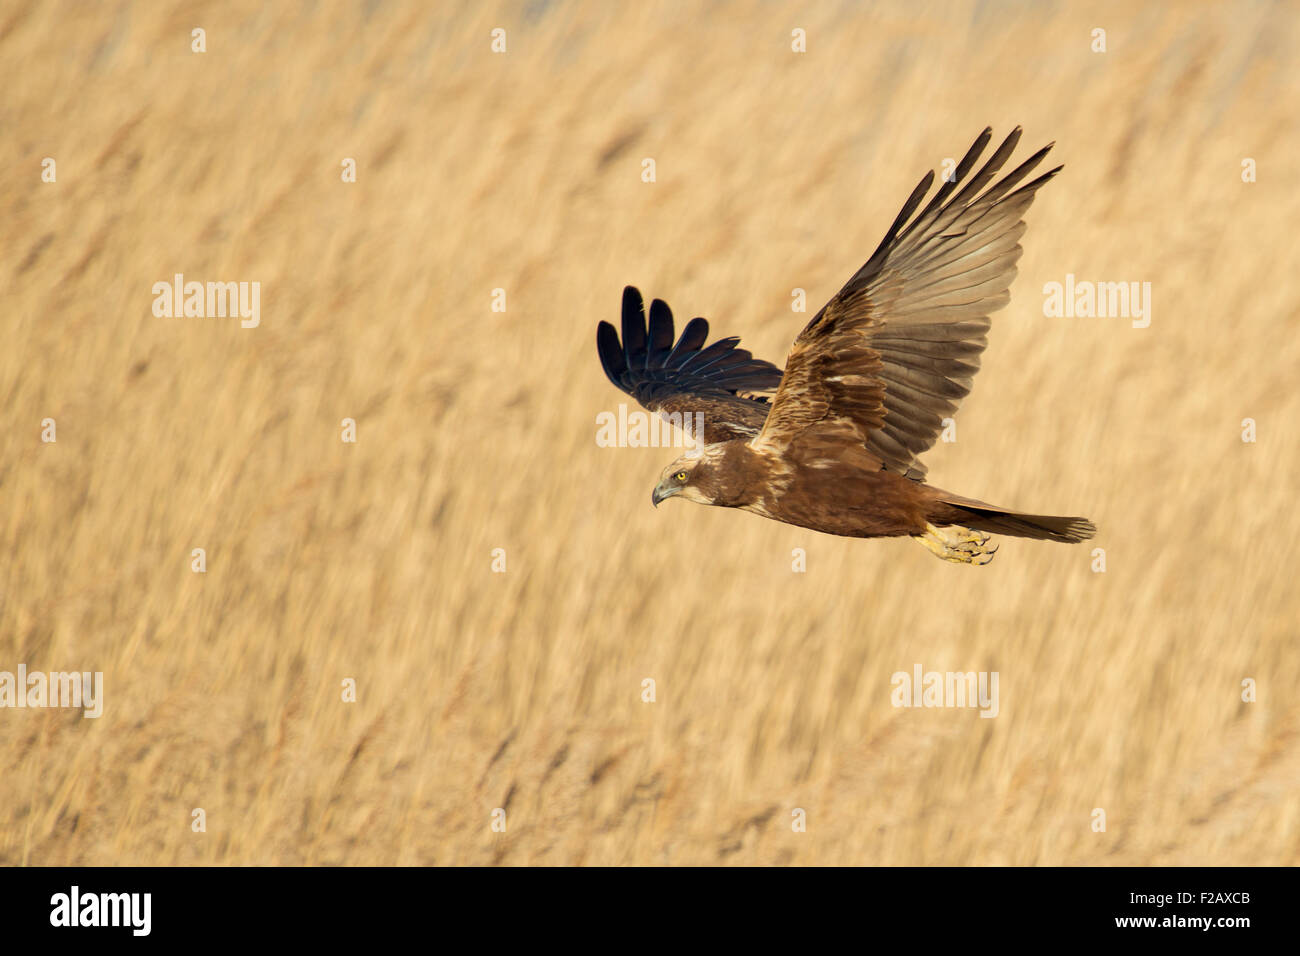 Rohrweihe / Marsh Harrier ( Circus aeruginosus ) flying in best light over reed gras, its wings wide open. Stock Photo